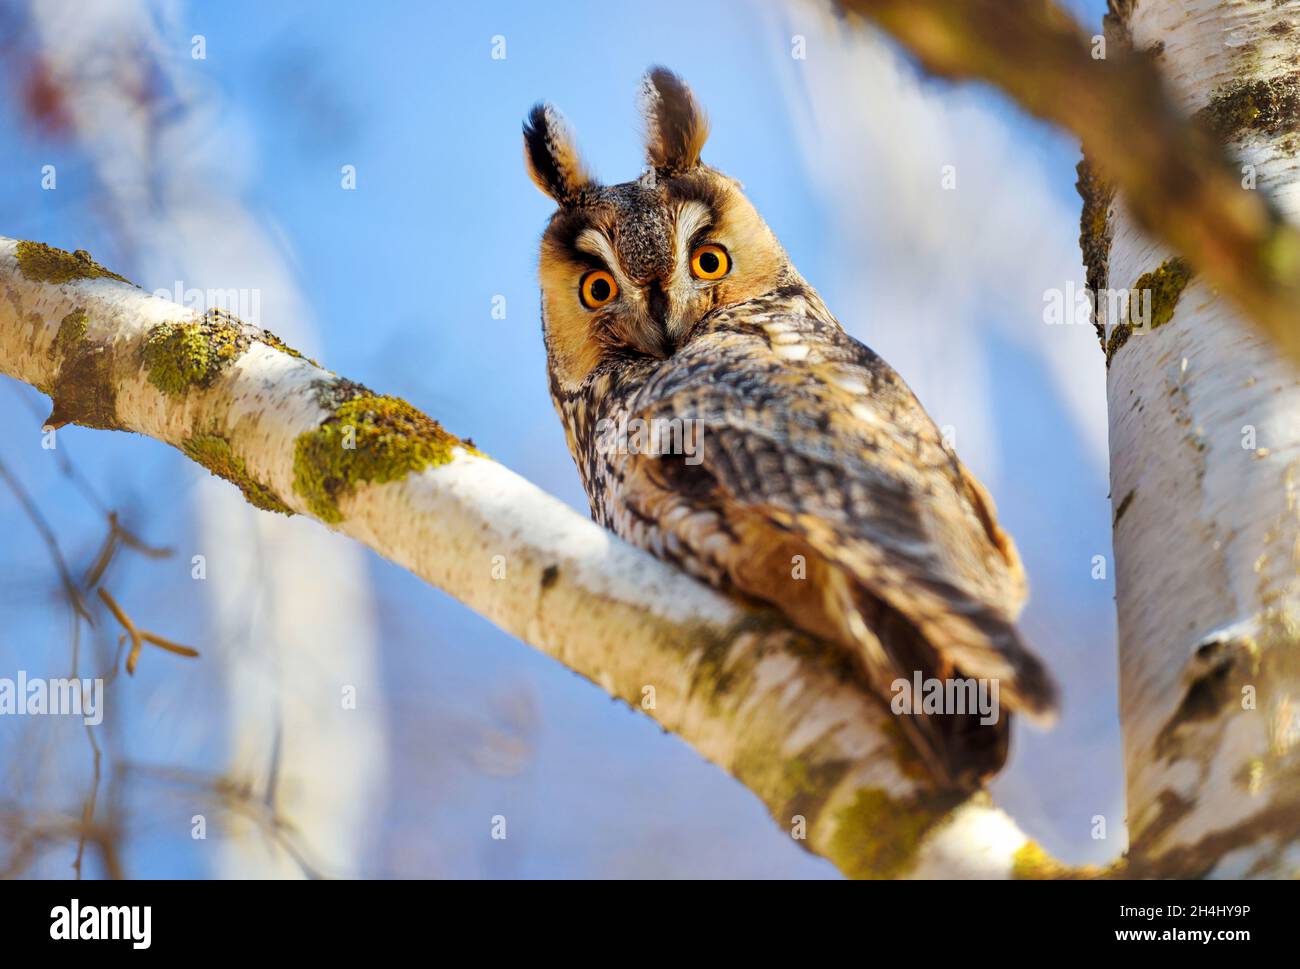 A Long-eared Owl (Asio otus) sitting on a tree against the blue sky. Sunny day Stock Photo